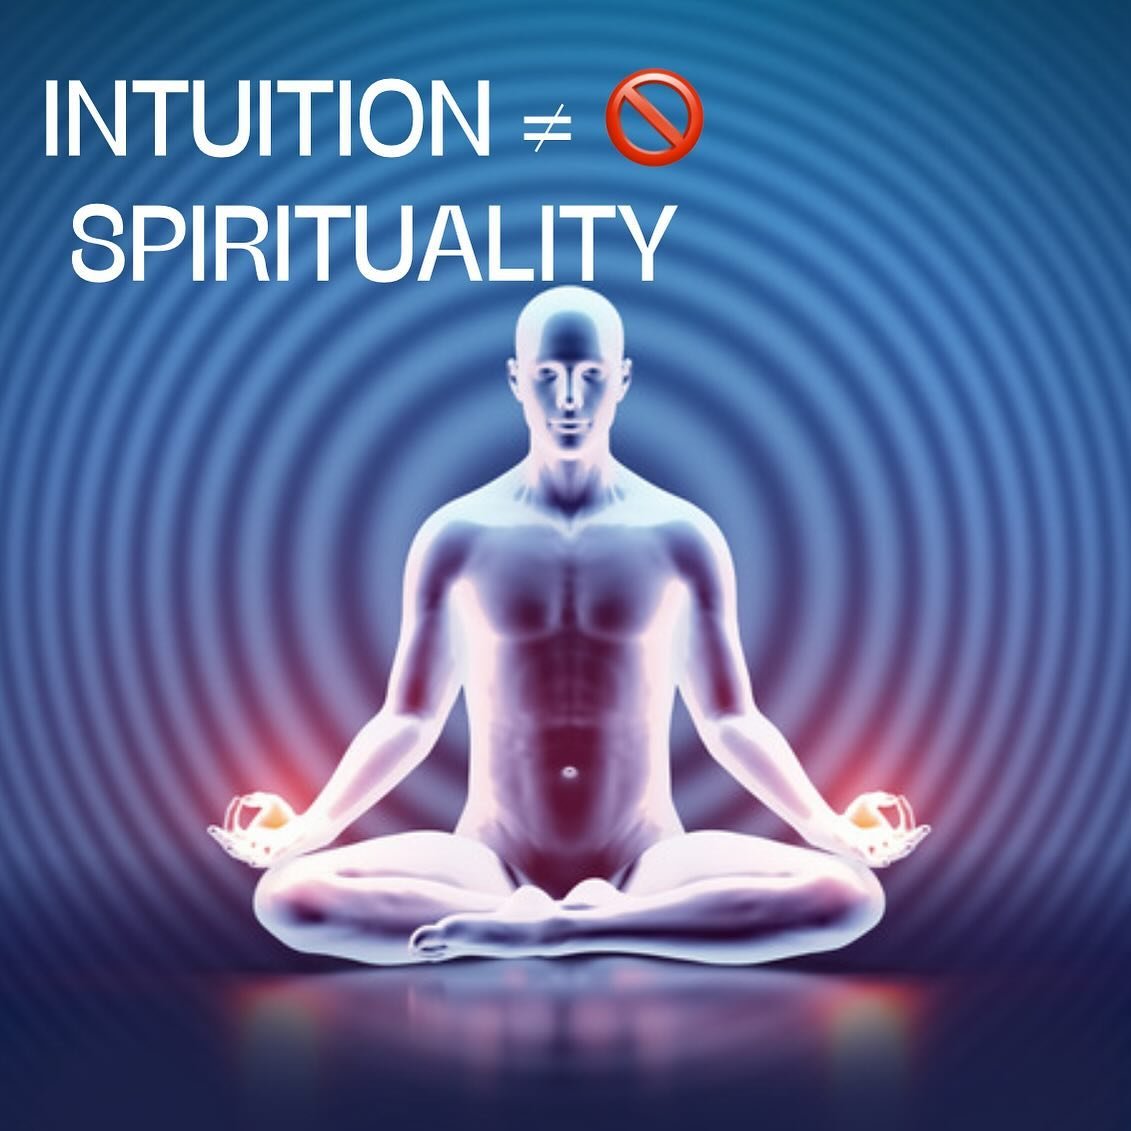 Intuition does NOT equal spirituality, and it&rsquo;s time to clear up this myth. Intuition is your birthright, inherent in all of us. But as life throws its challenges at us, we often lose touch with this deep inner wisdom. This isn&rsquo;t a spirit